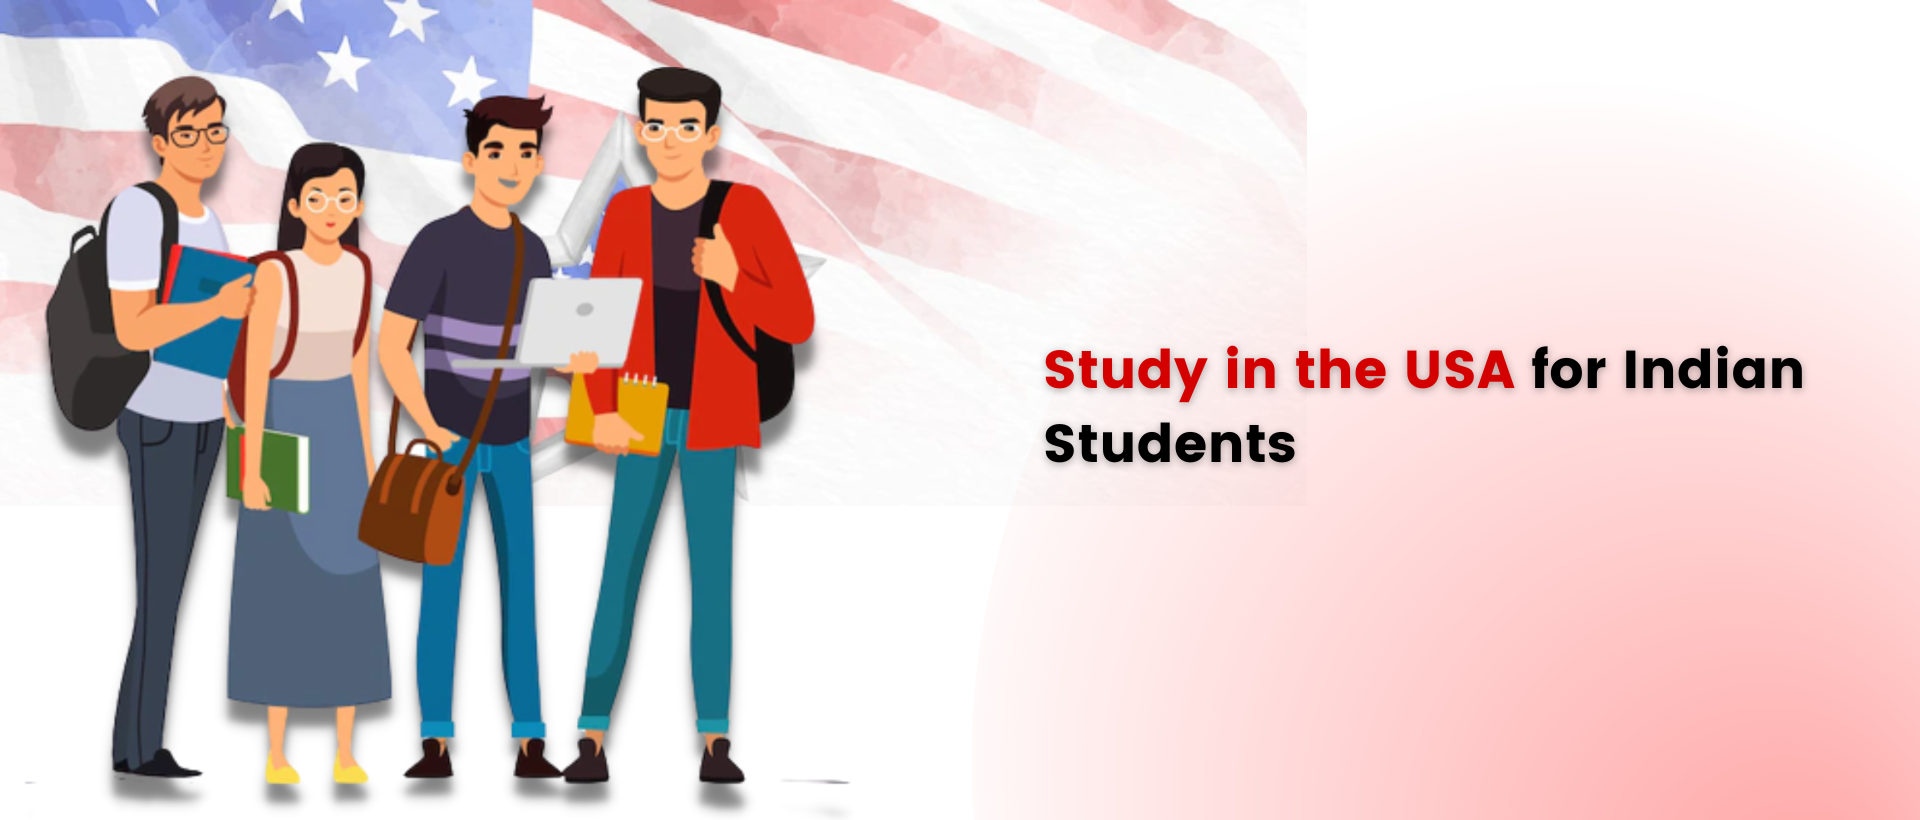 Study in the USA for Indian Students